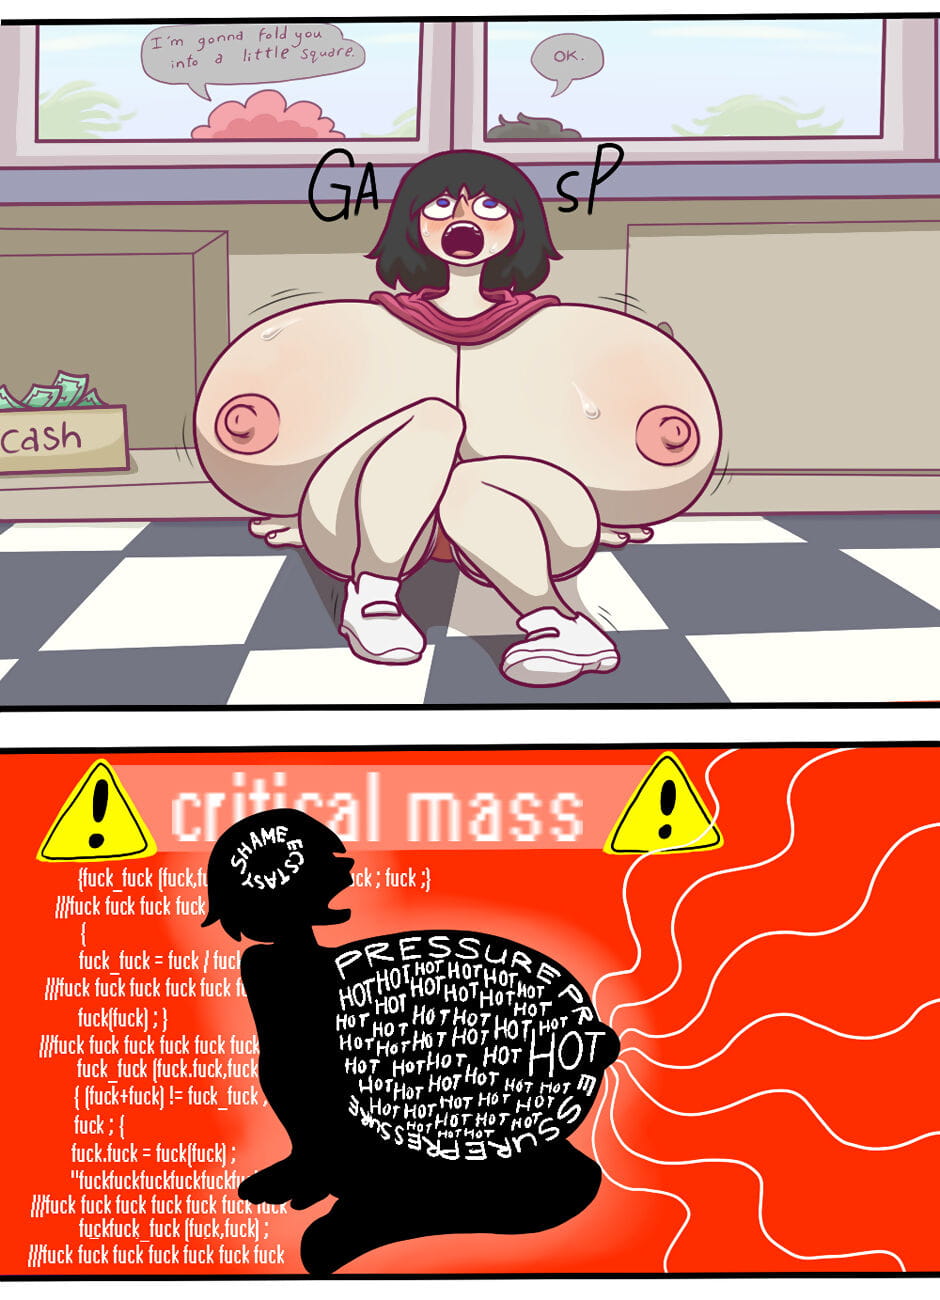 Grow Cone - part 2 page 1